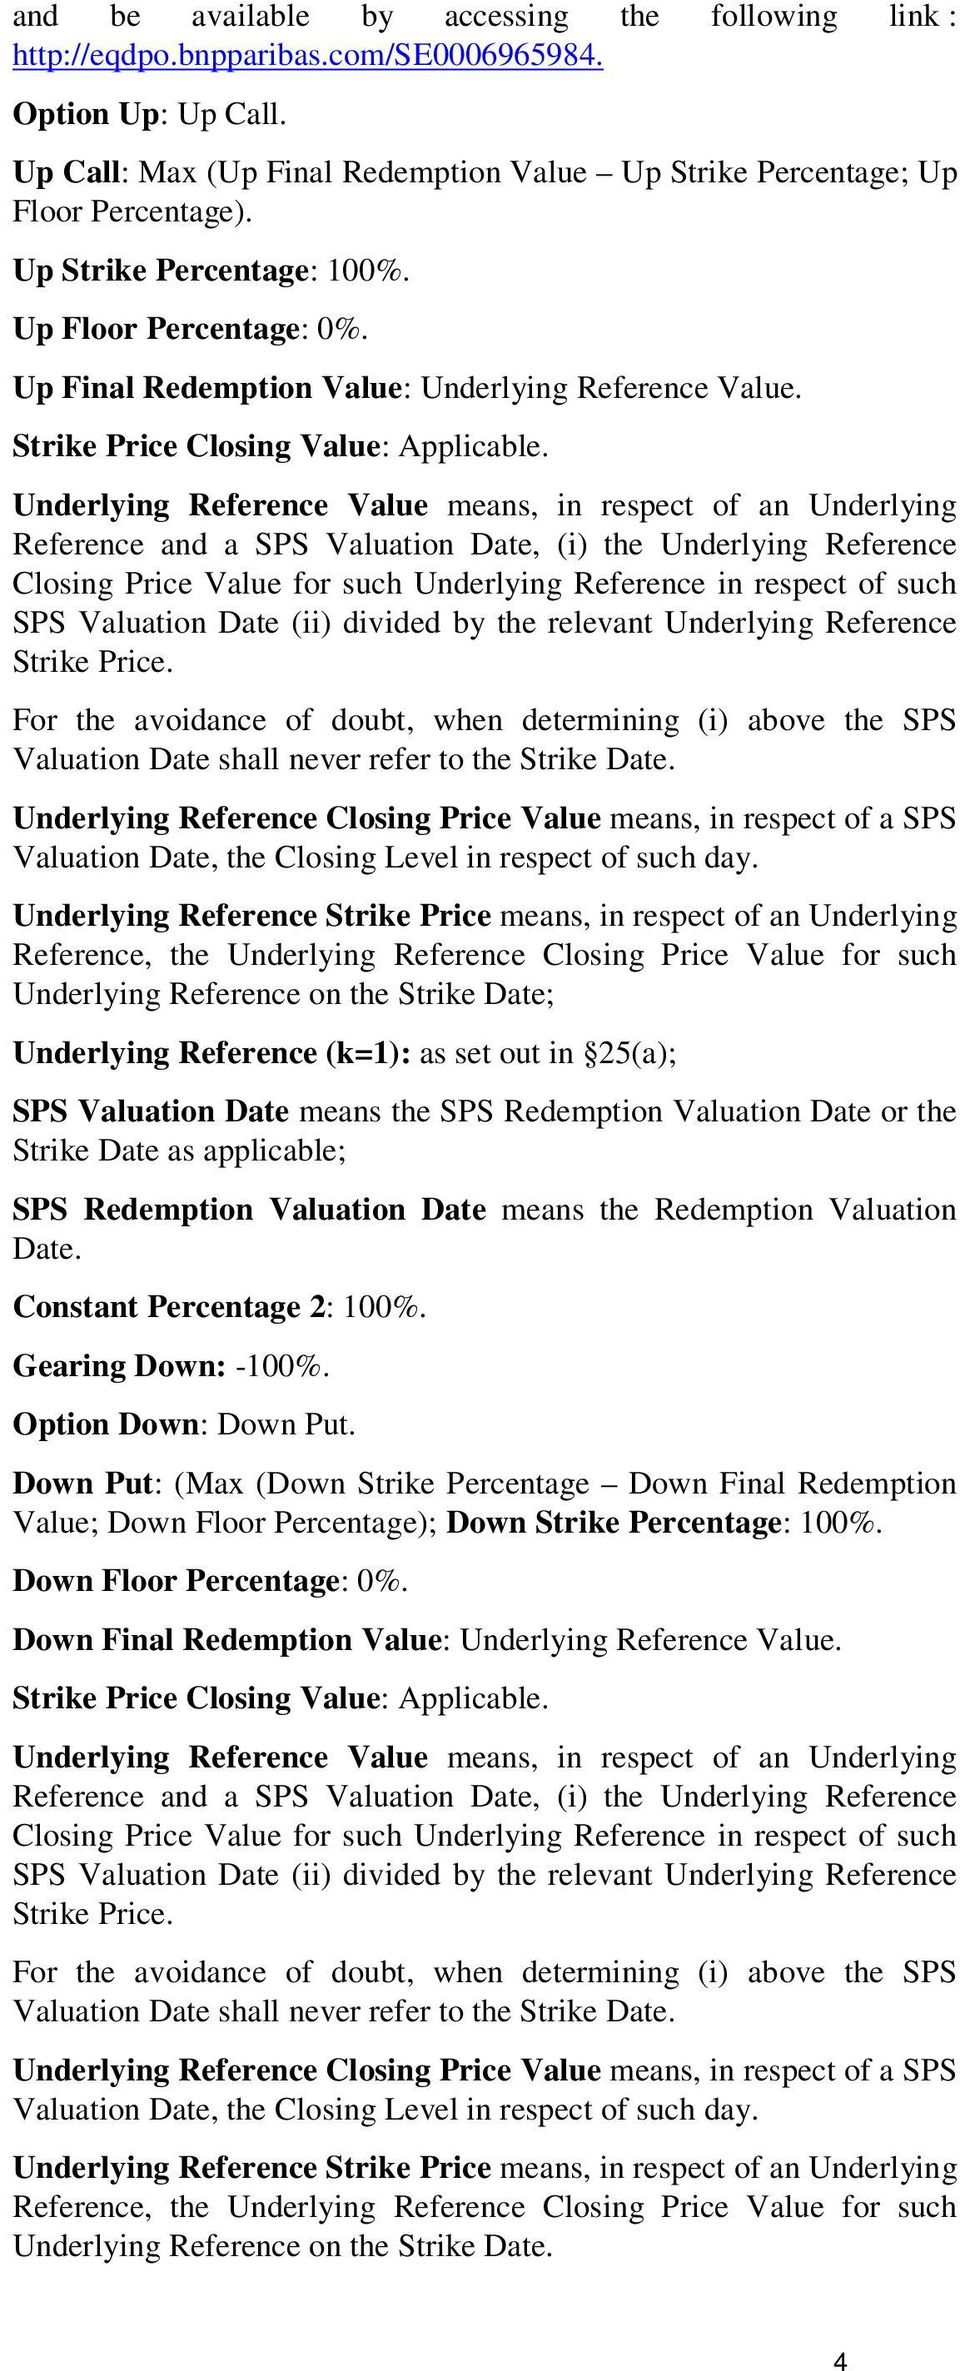 Underlying Reference Value means, in respect of an Underlying Reference and a SPS Valuation Date, (i) the Underlying Reference Closing Price Value for such Underlying Reference in respect of such SPS